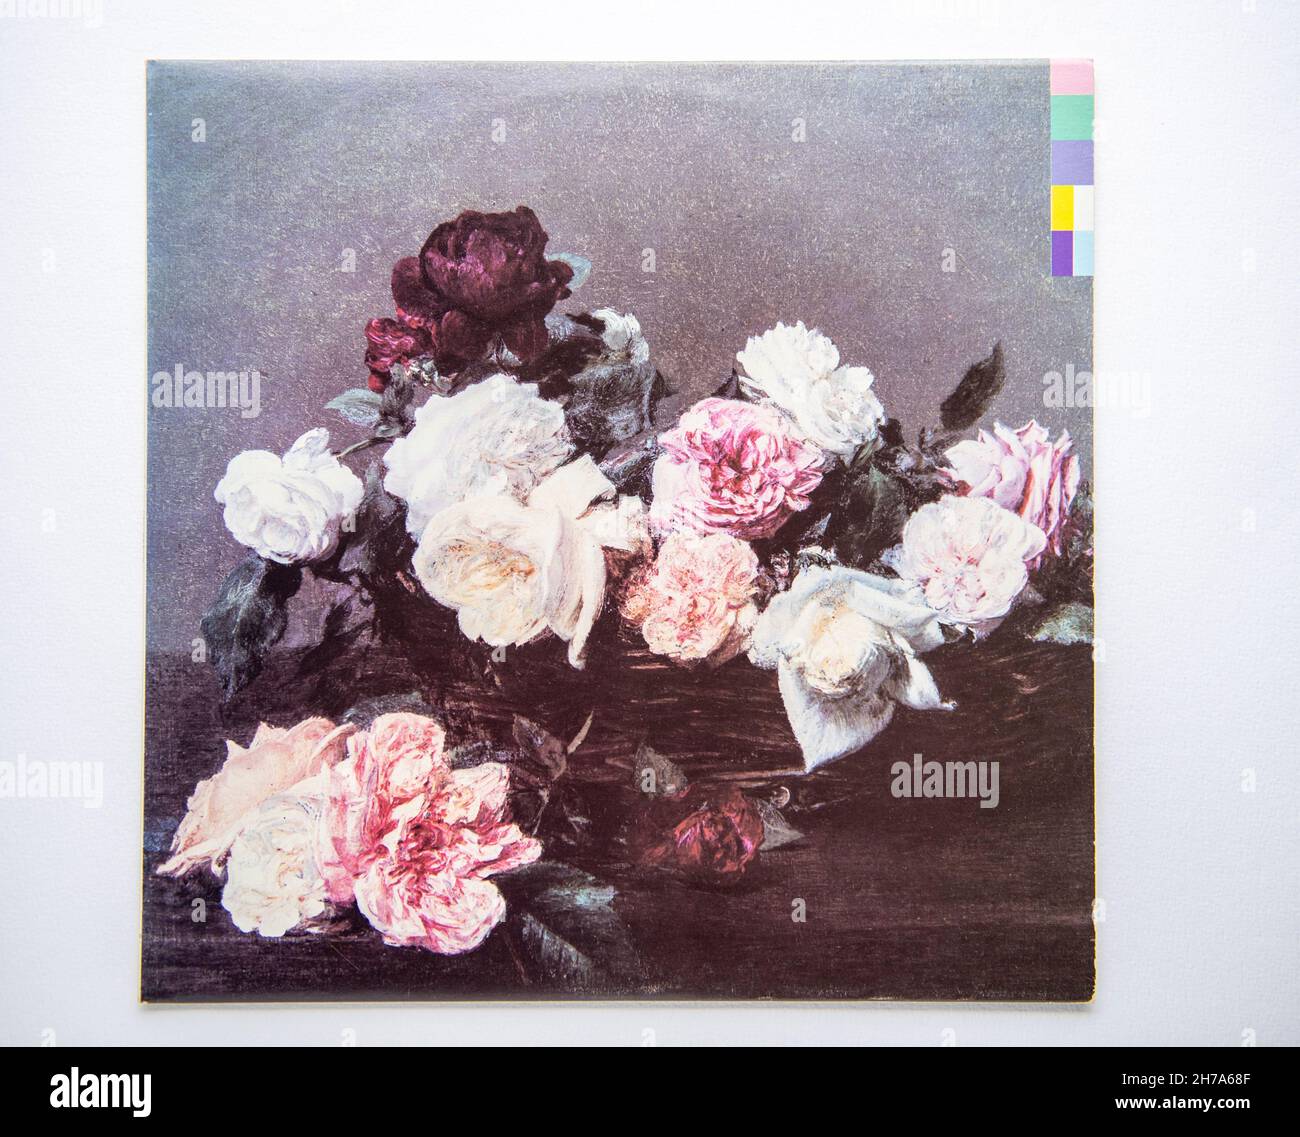 New Order Power Corruption And Lies Wallpaper